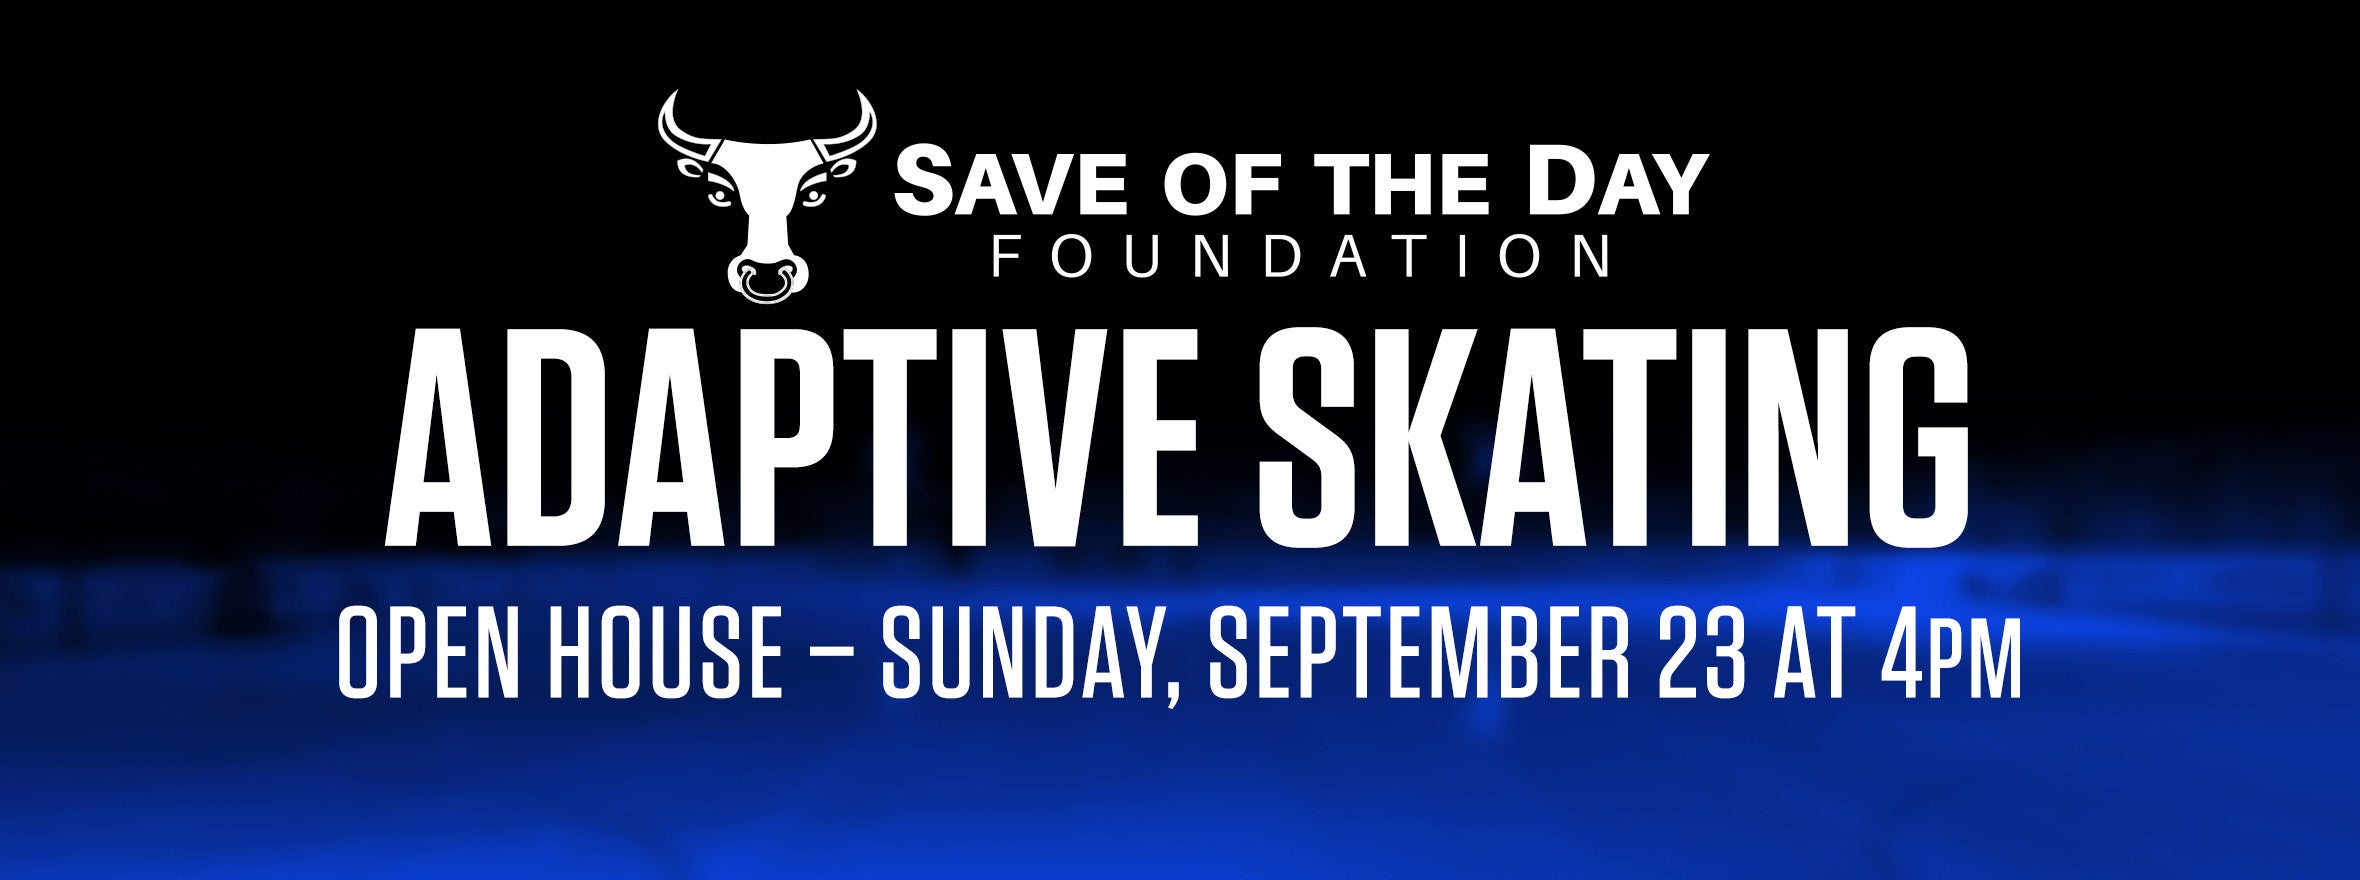 SAVE OF THE DAY FOUNDATION ANNOUNCES ADAPTIVE SKATING PROGRAM